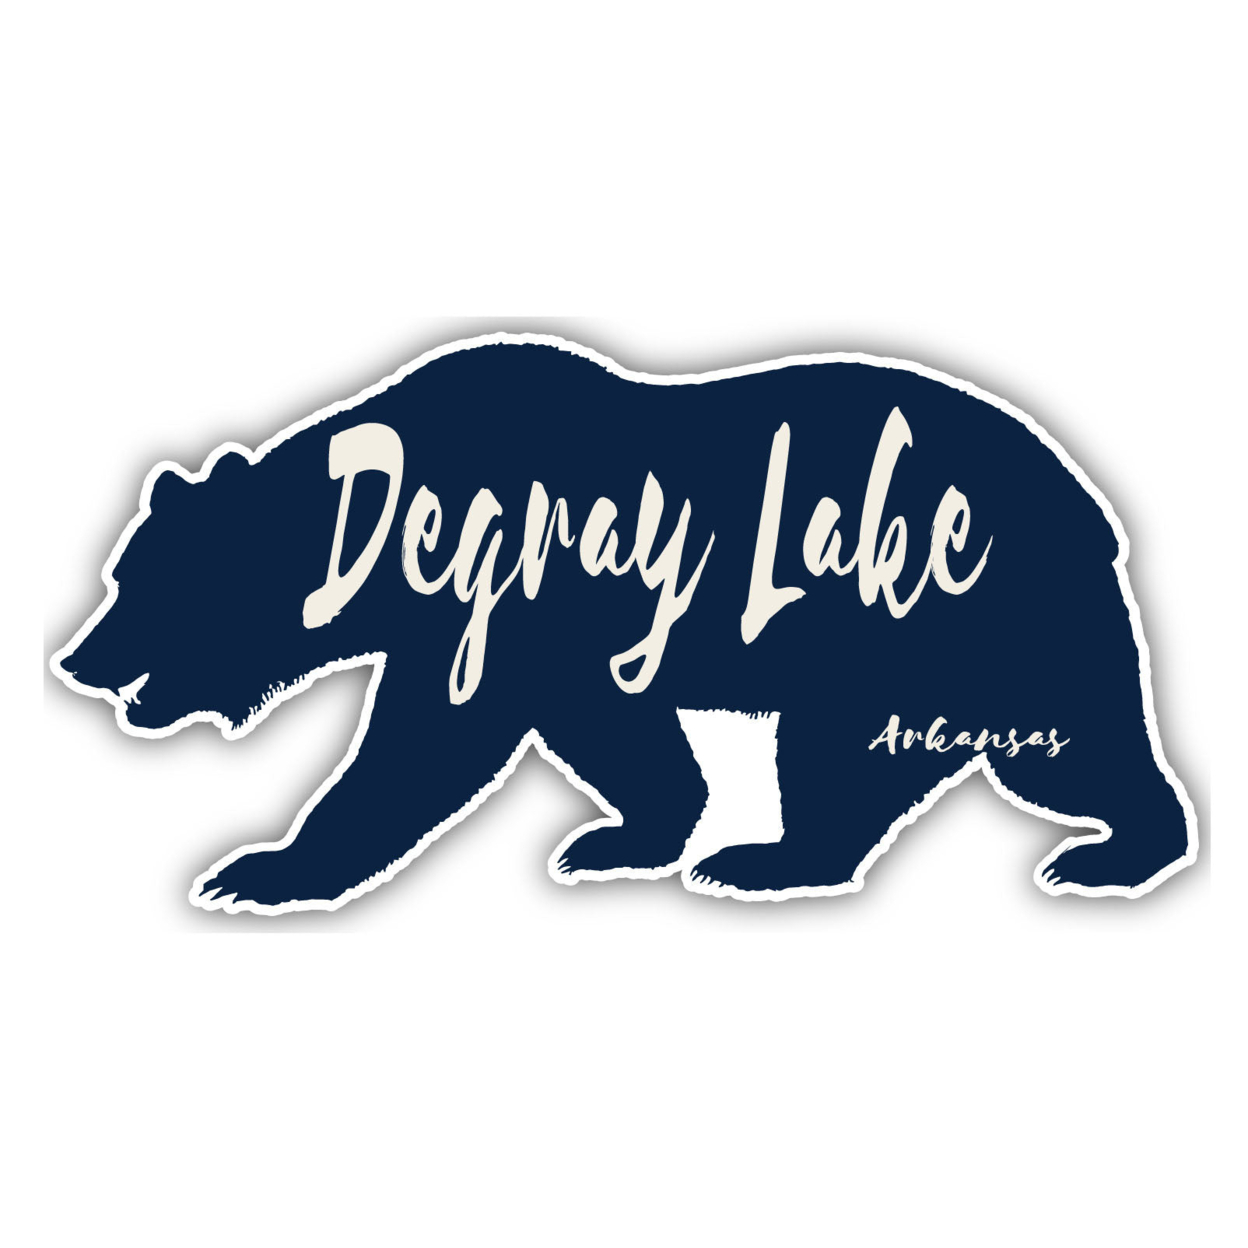 DeGray Lake Arkansas Souvenir Decorative Stickers (Choose Theme And Size) - 4-Pack, 12-Inch, Tent